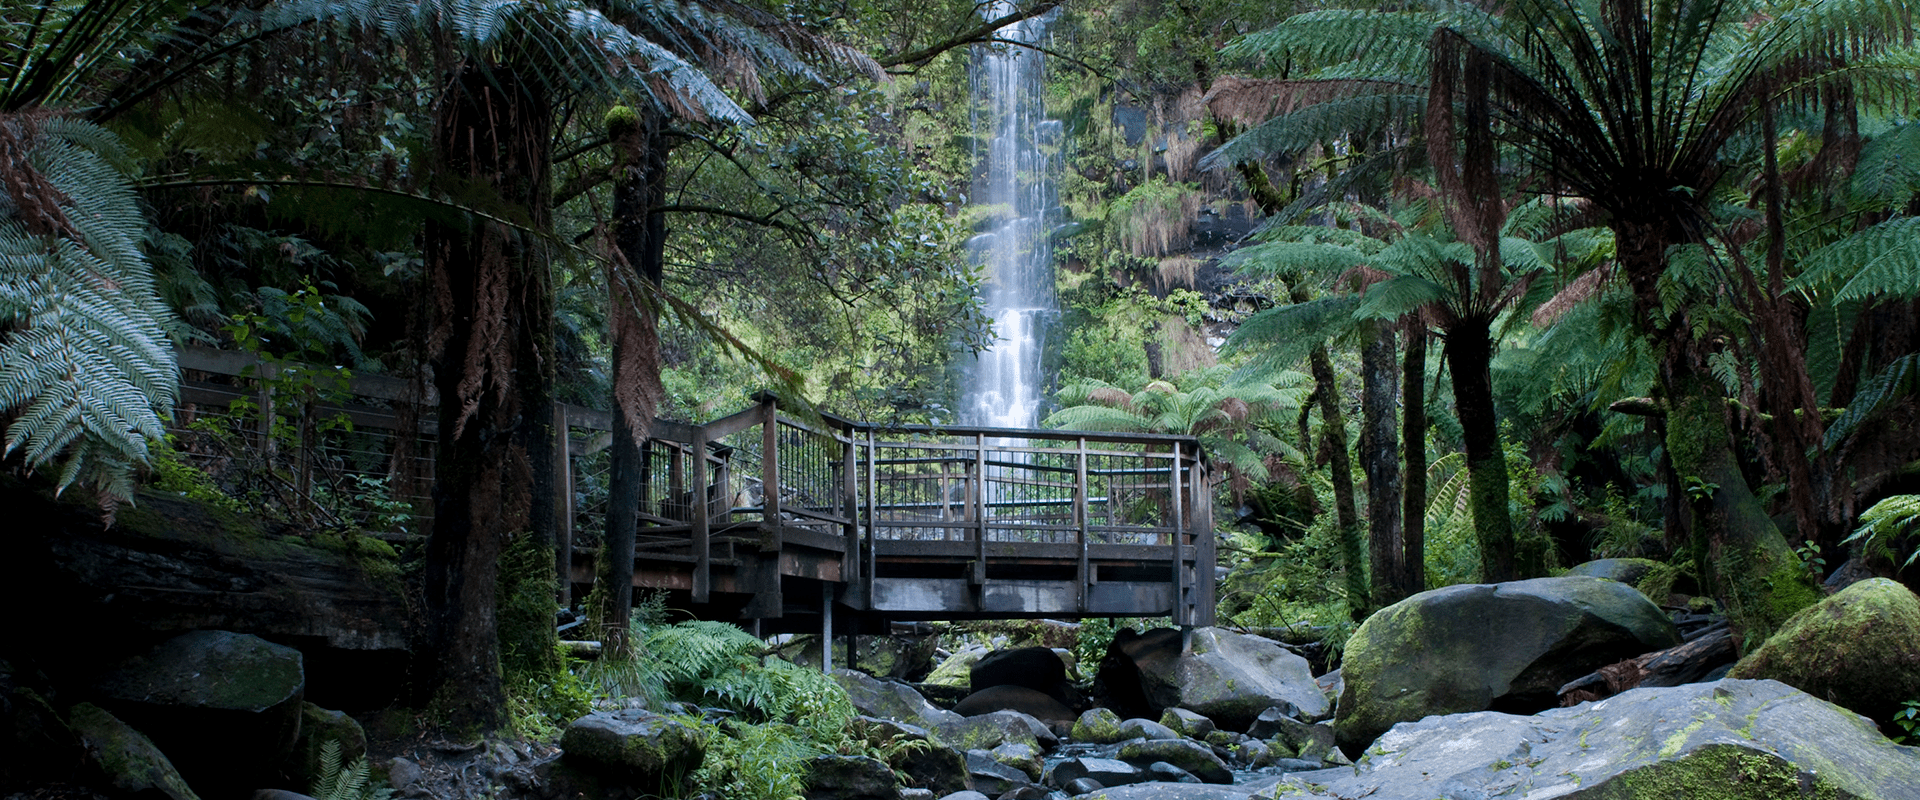 Waterfall flows into a mountain creek behind a walking visitor platform surrounded by lush tree ferns. 